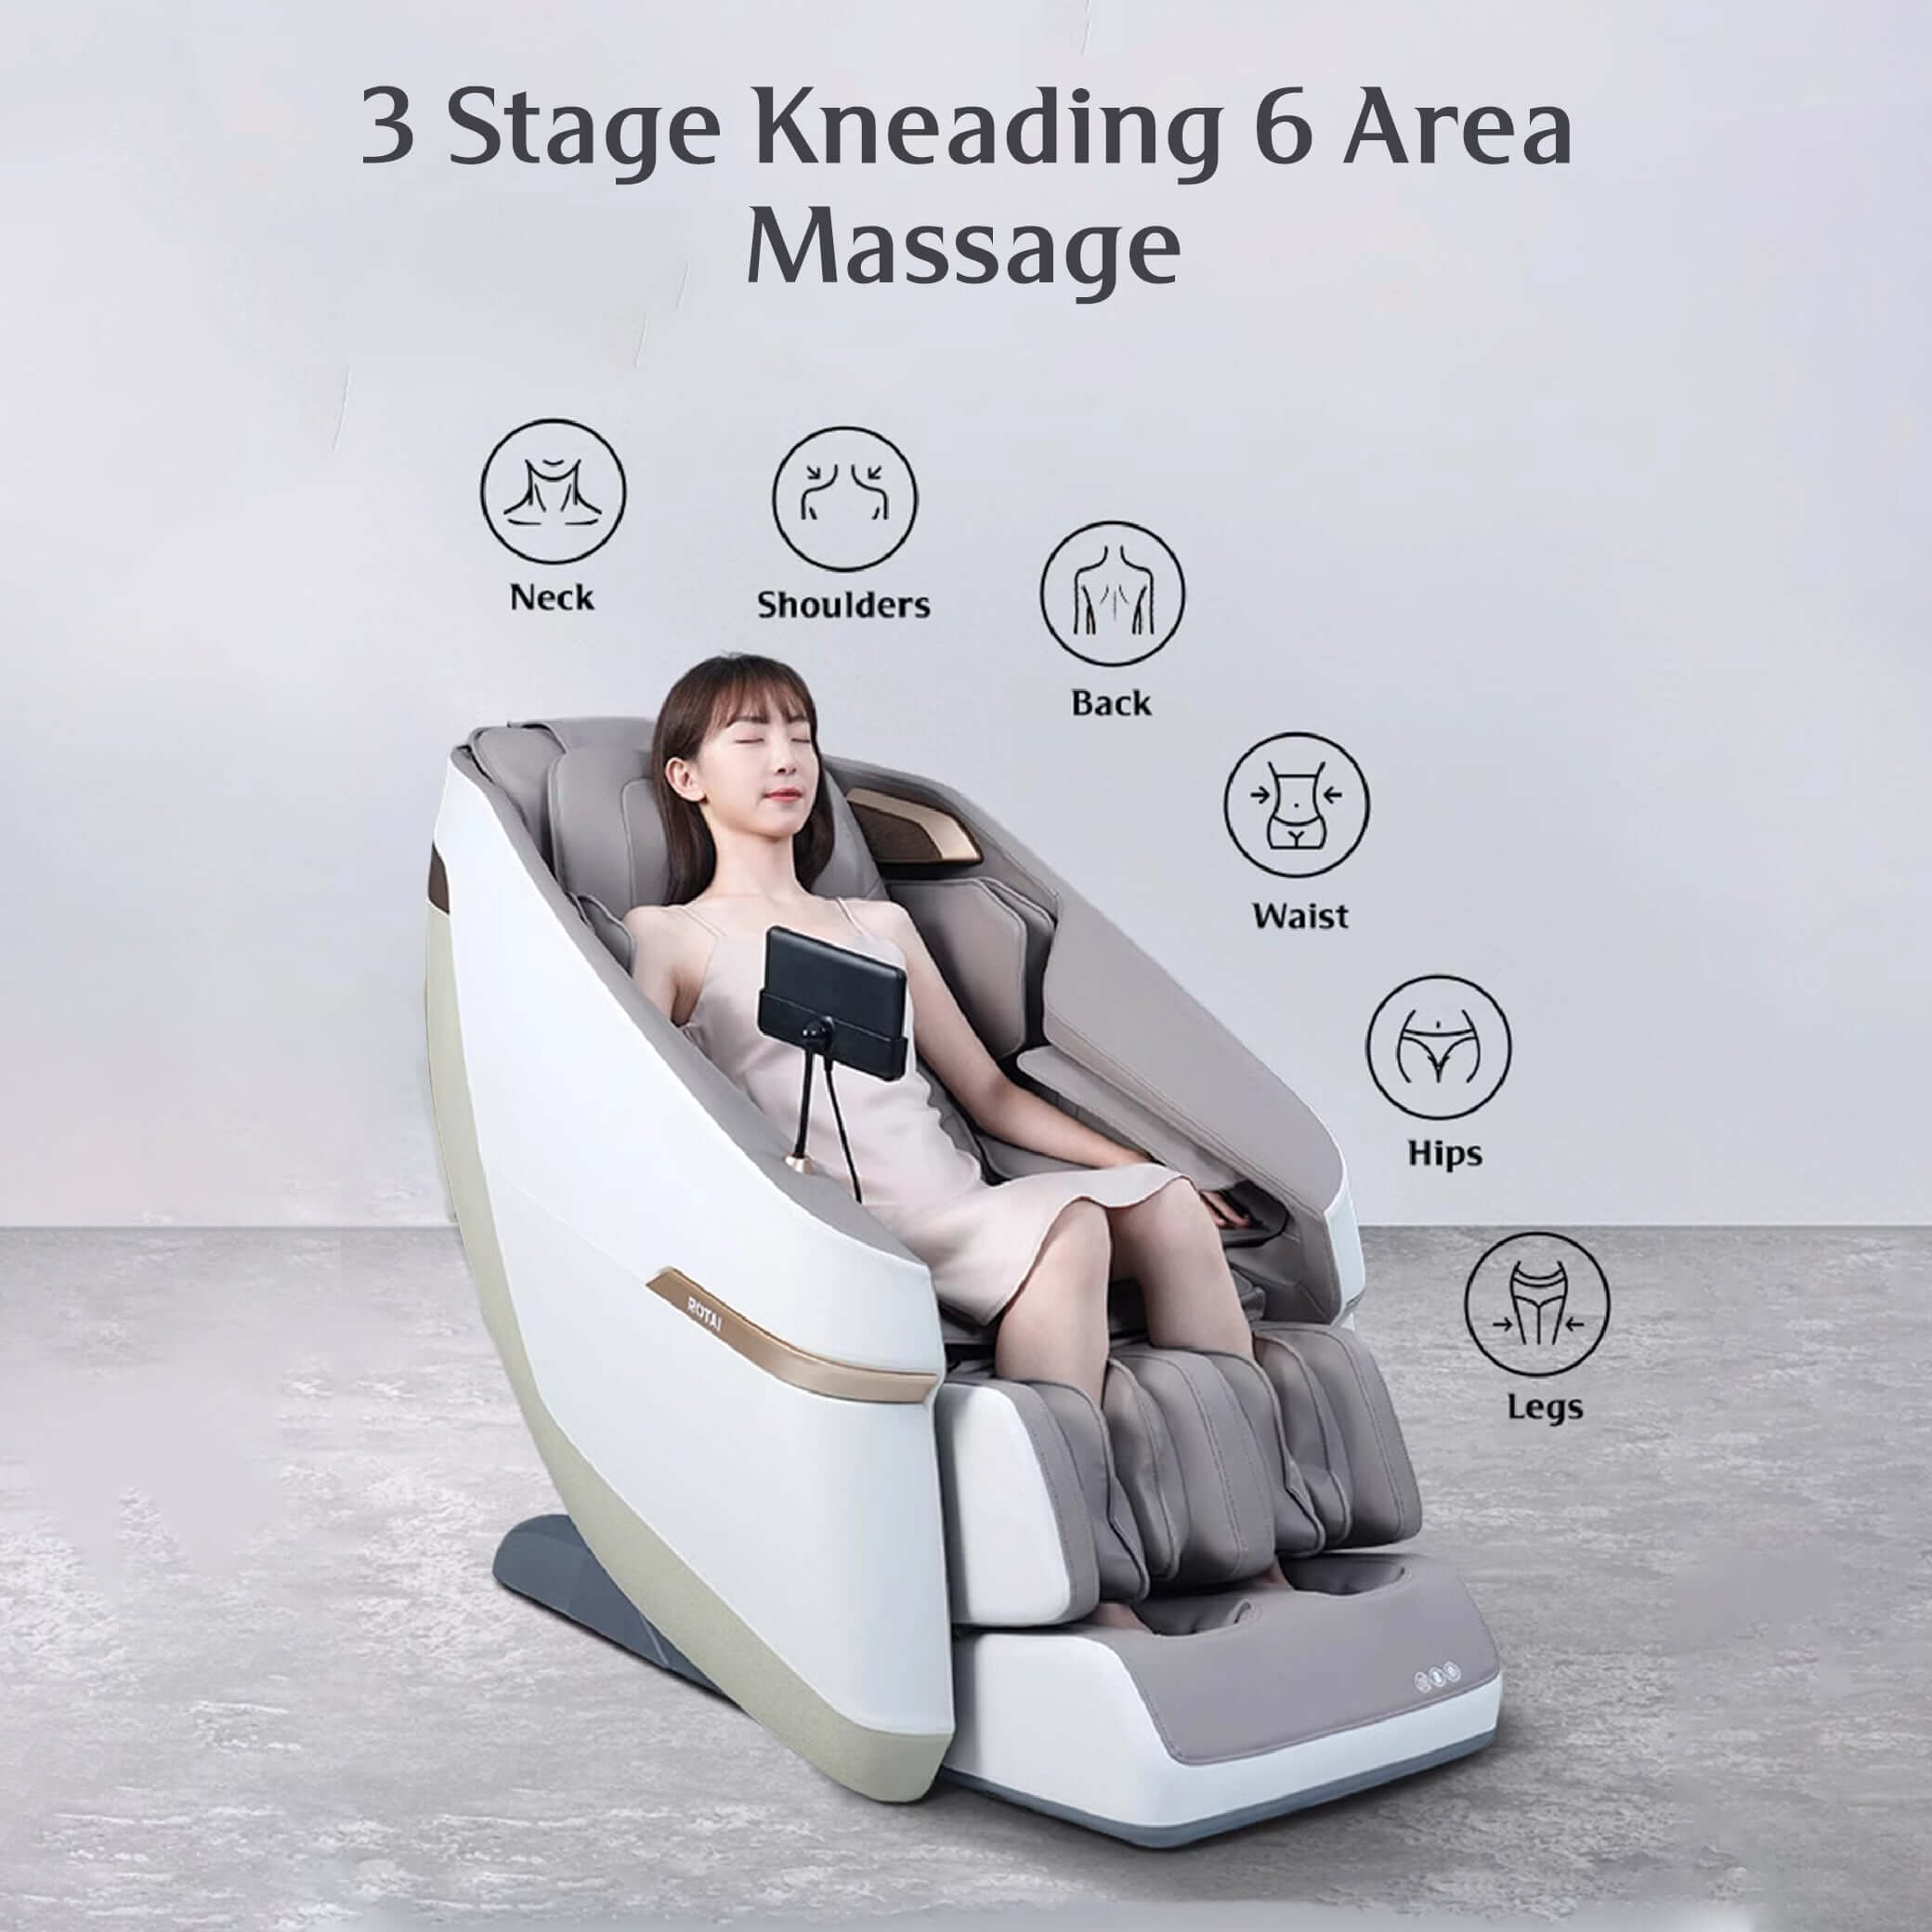 Woman relaxing in a Jimny Massage Chair demonstrating 3 stage kneading and 6 area massage for neck, shoulders, back, waist, hips, and legs